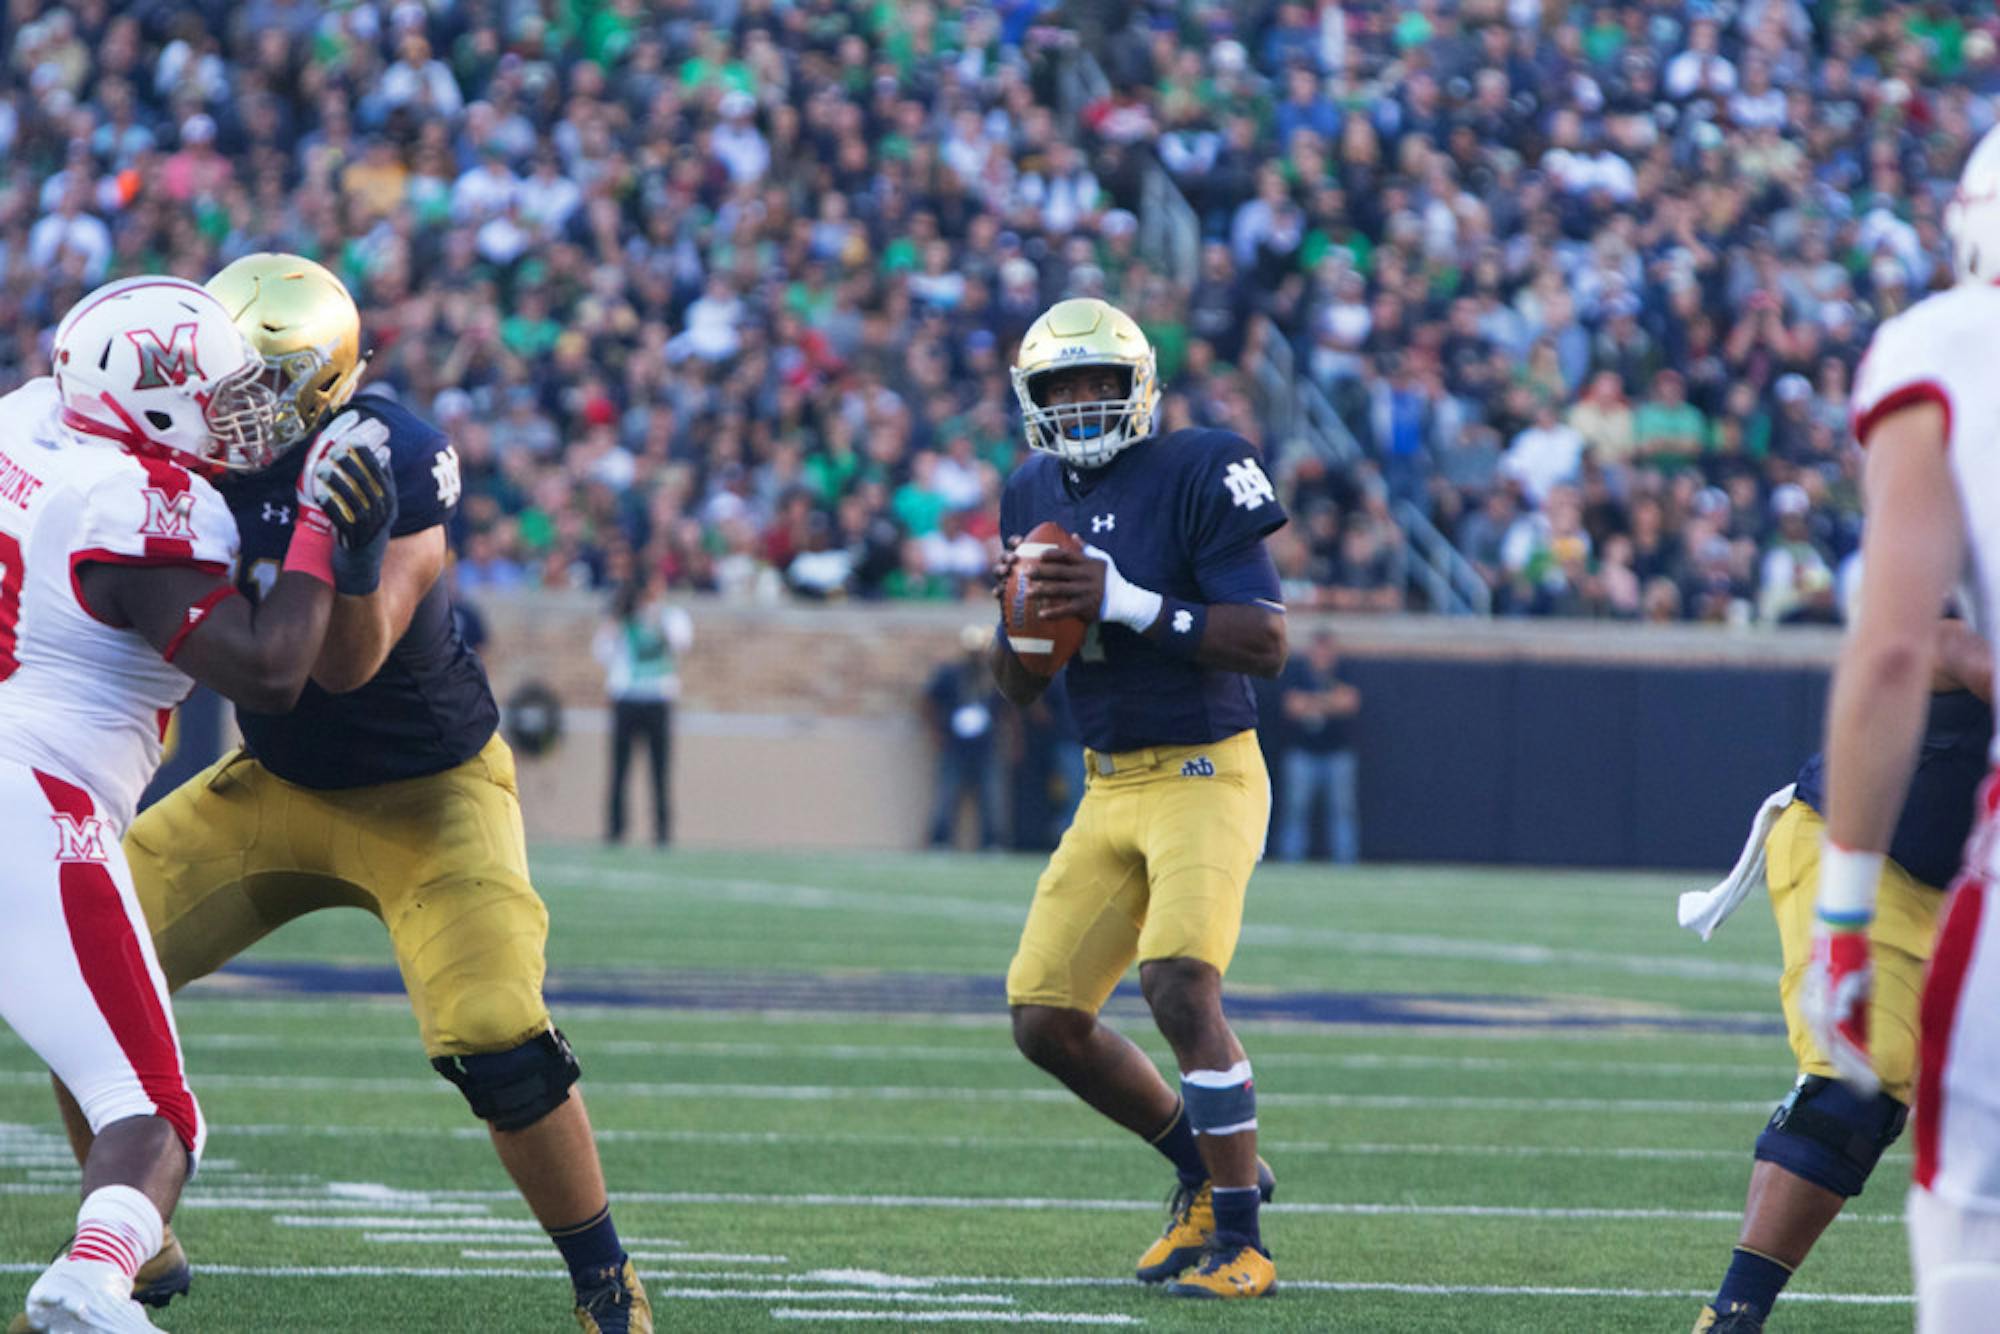 Irish junior quarterback Brandon Wimbush drops back to pass and surveys the field during Notre Dame’s 52-17 win over Miami (OH) on Saturday at Notre Dame Stadium. Wimbush passed for 119 yards.